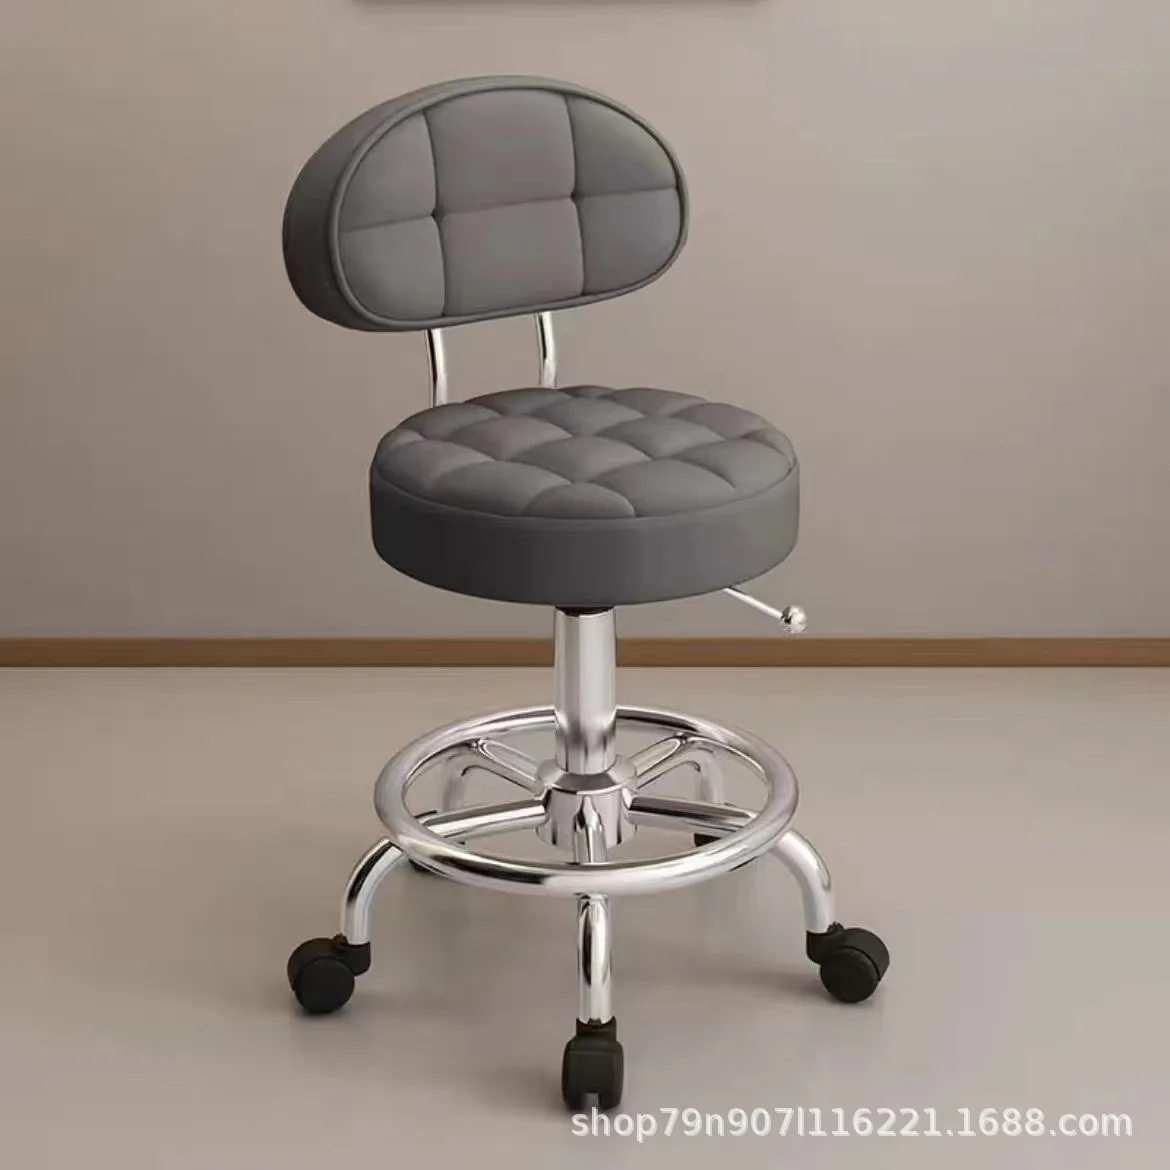 

HH610 hairstyle chair bald willow nails lift machine chair beauty stool rotation rotation gong furnace